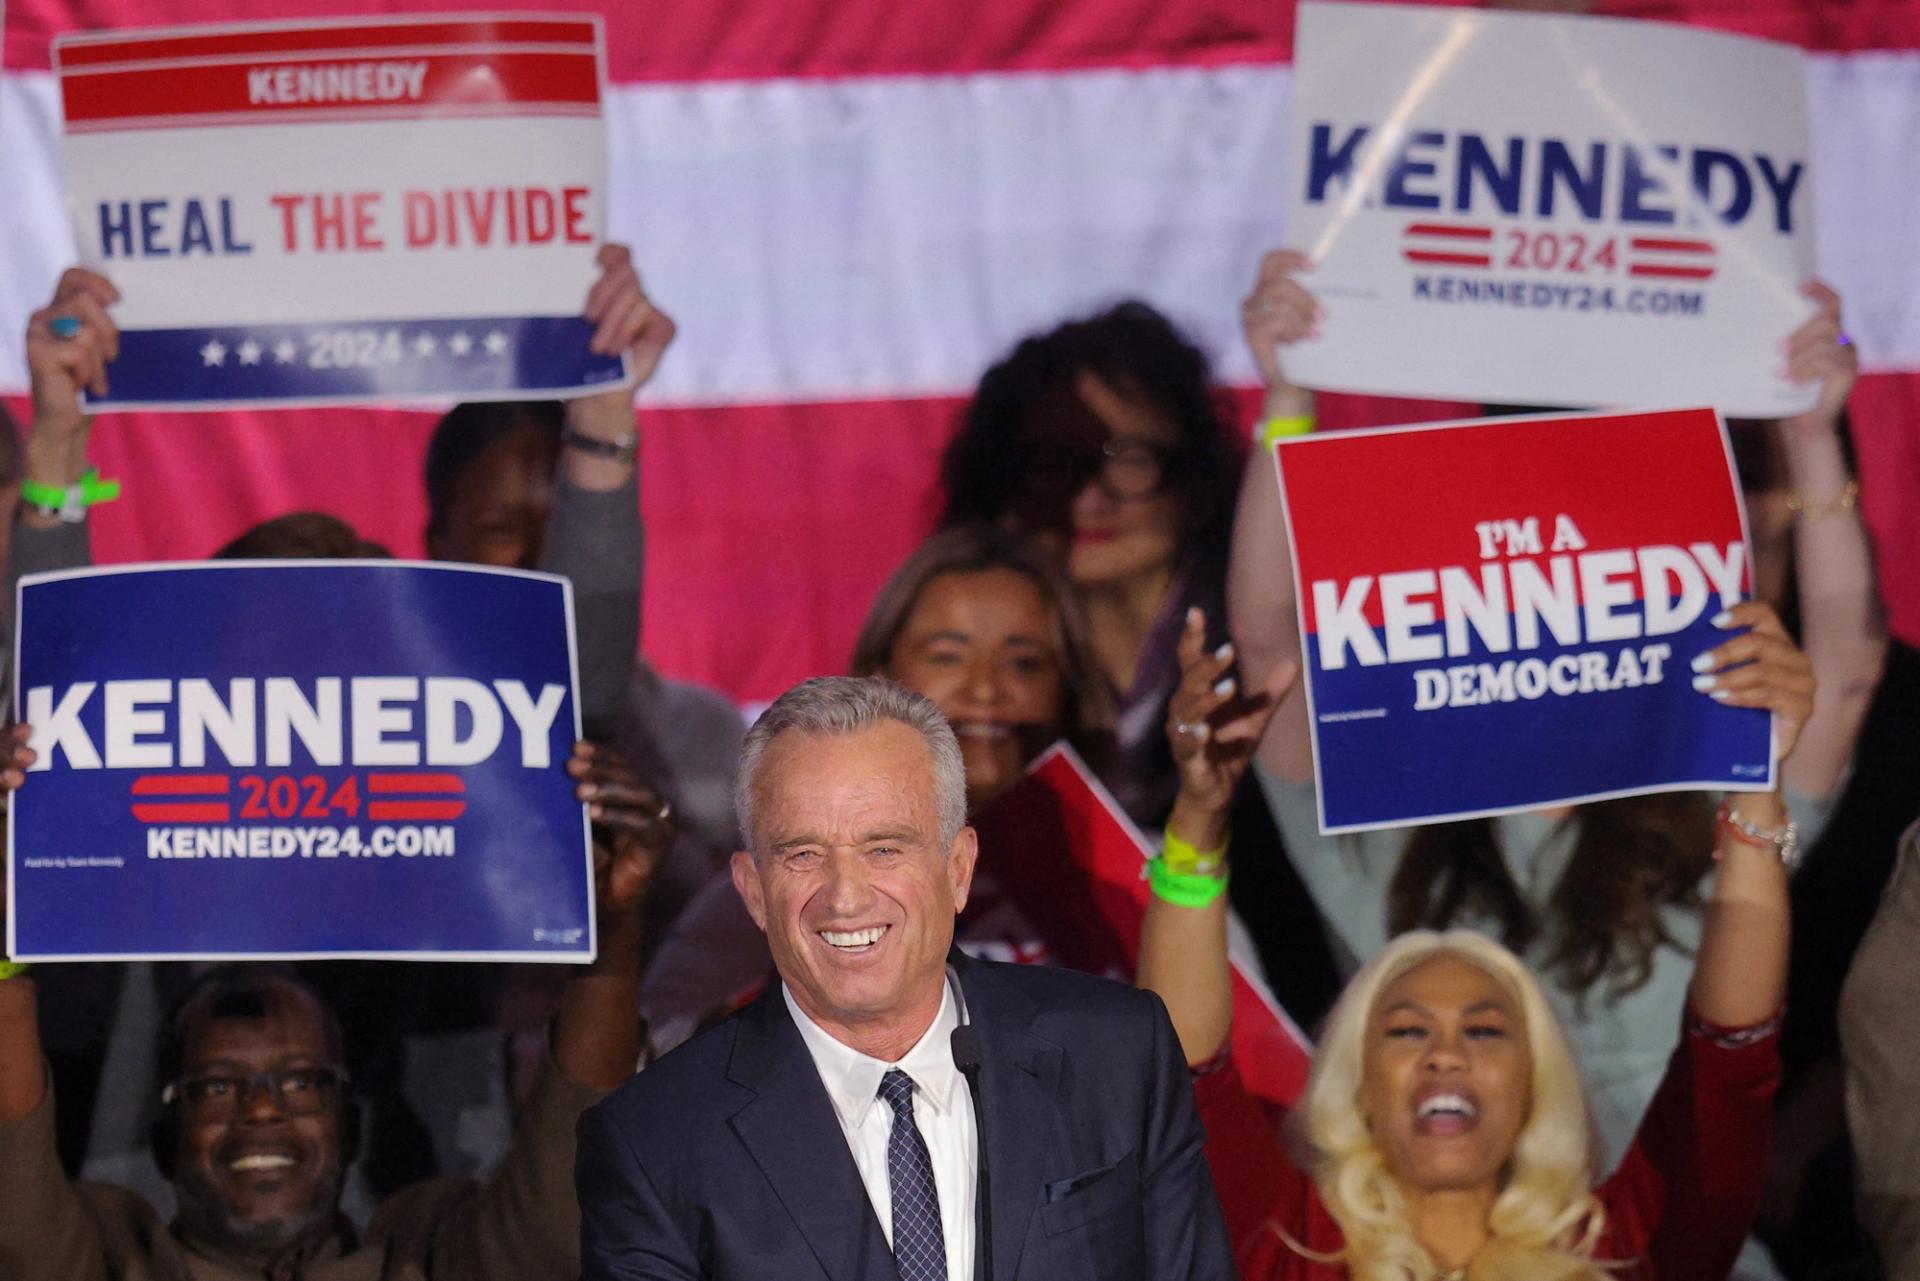 Robert F. Kennedy Jr. delivers a speech announcing his candidacy for the Democratic presidential nomination.